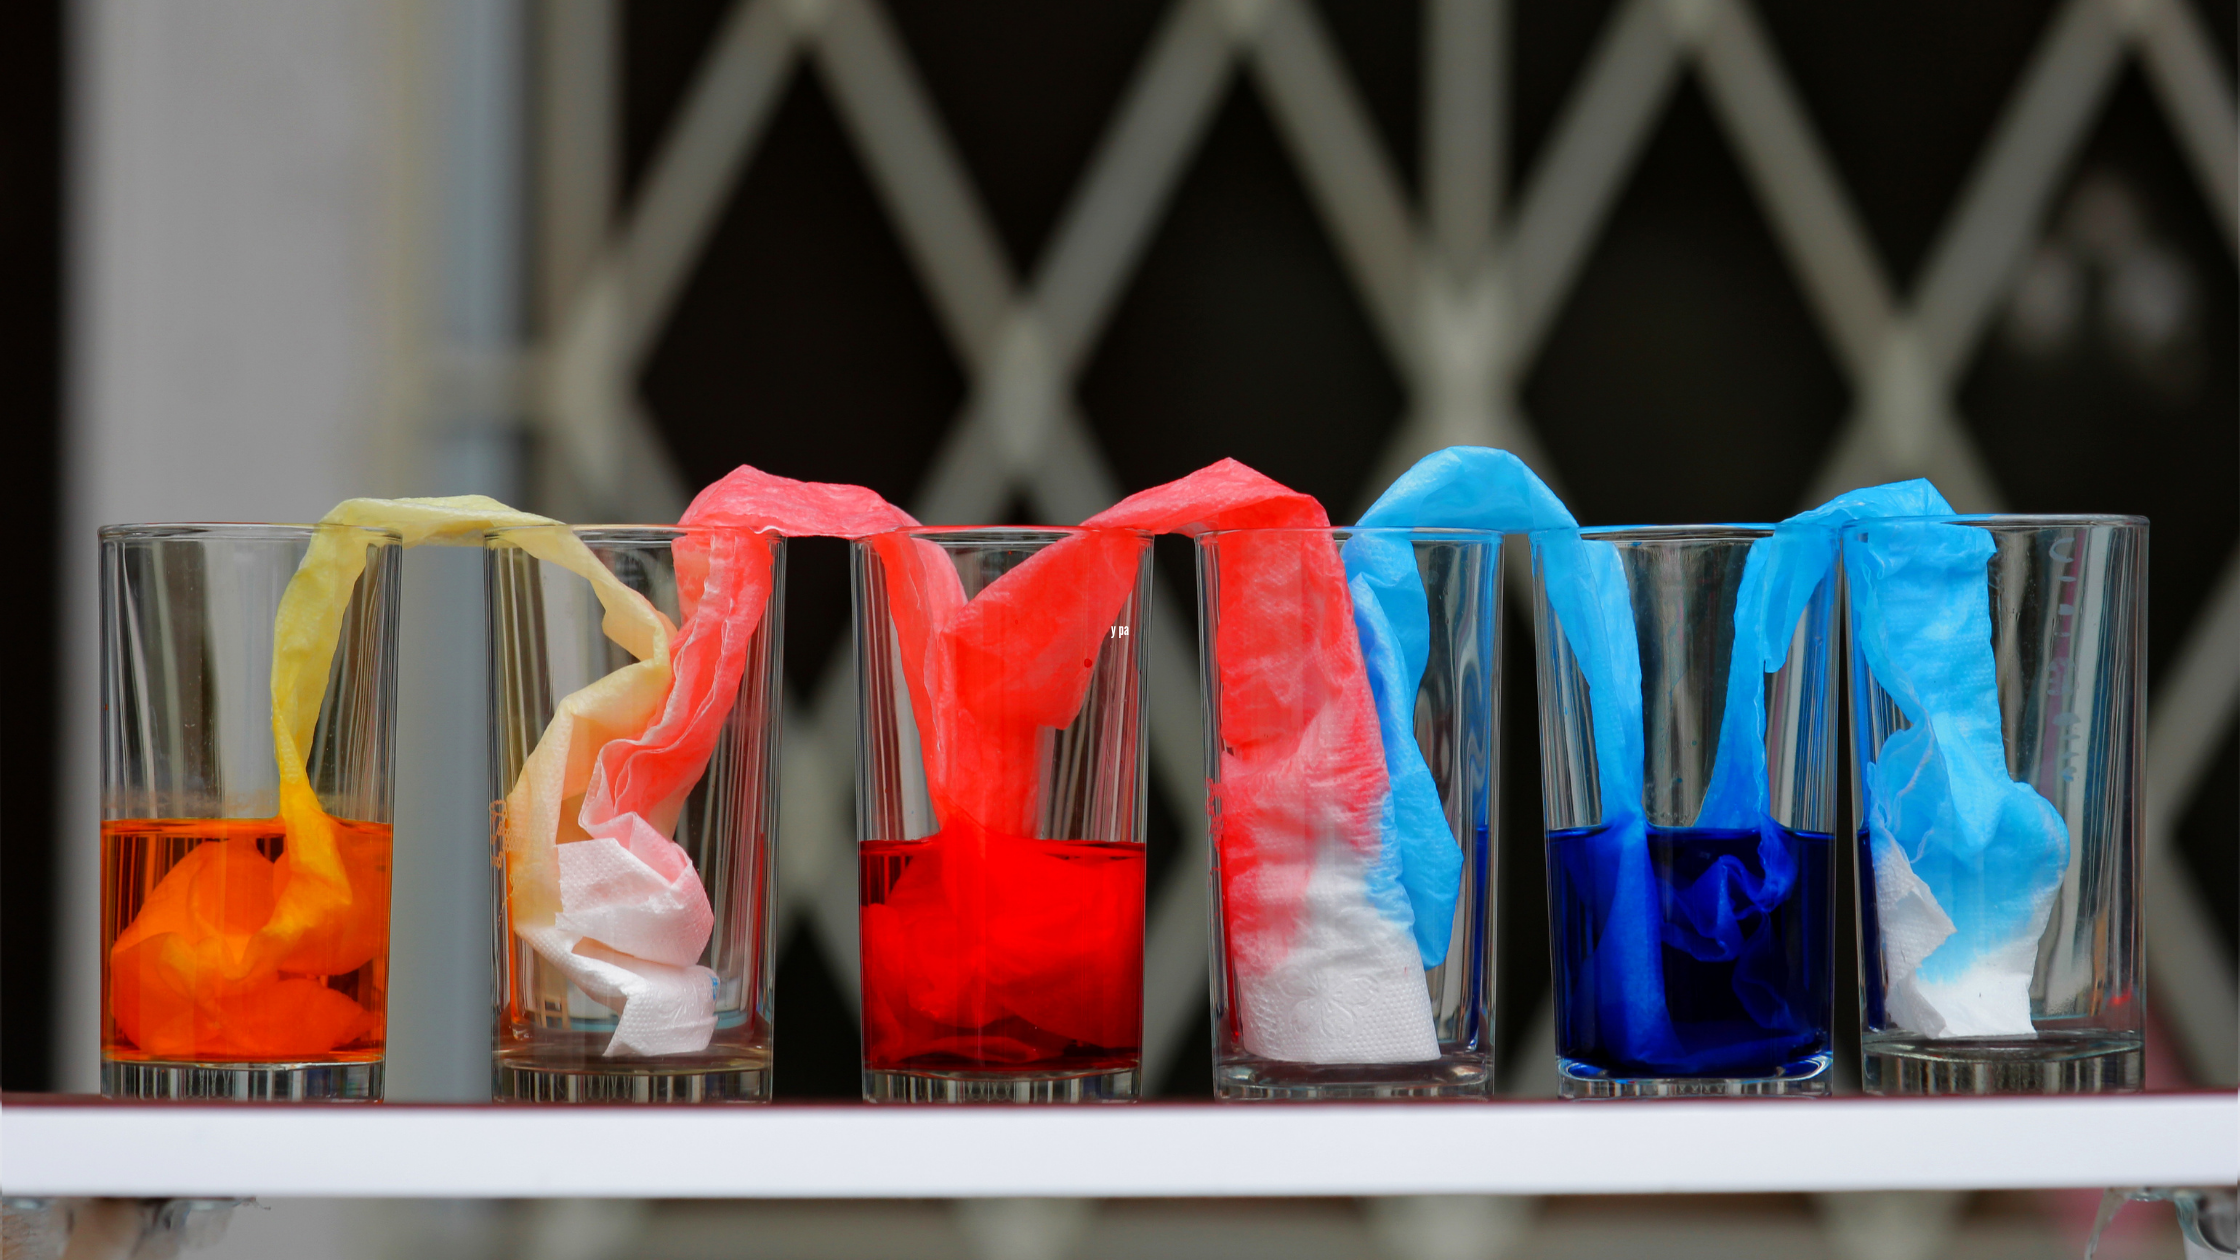 5 Fun & Cool Science Activities with Dye to Do With the Kids 24